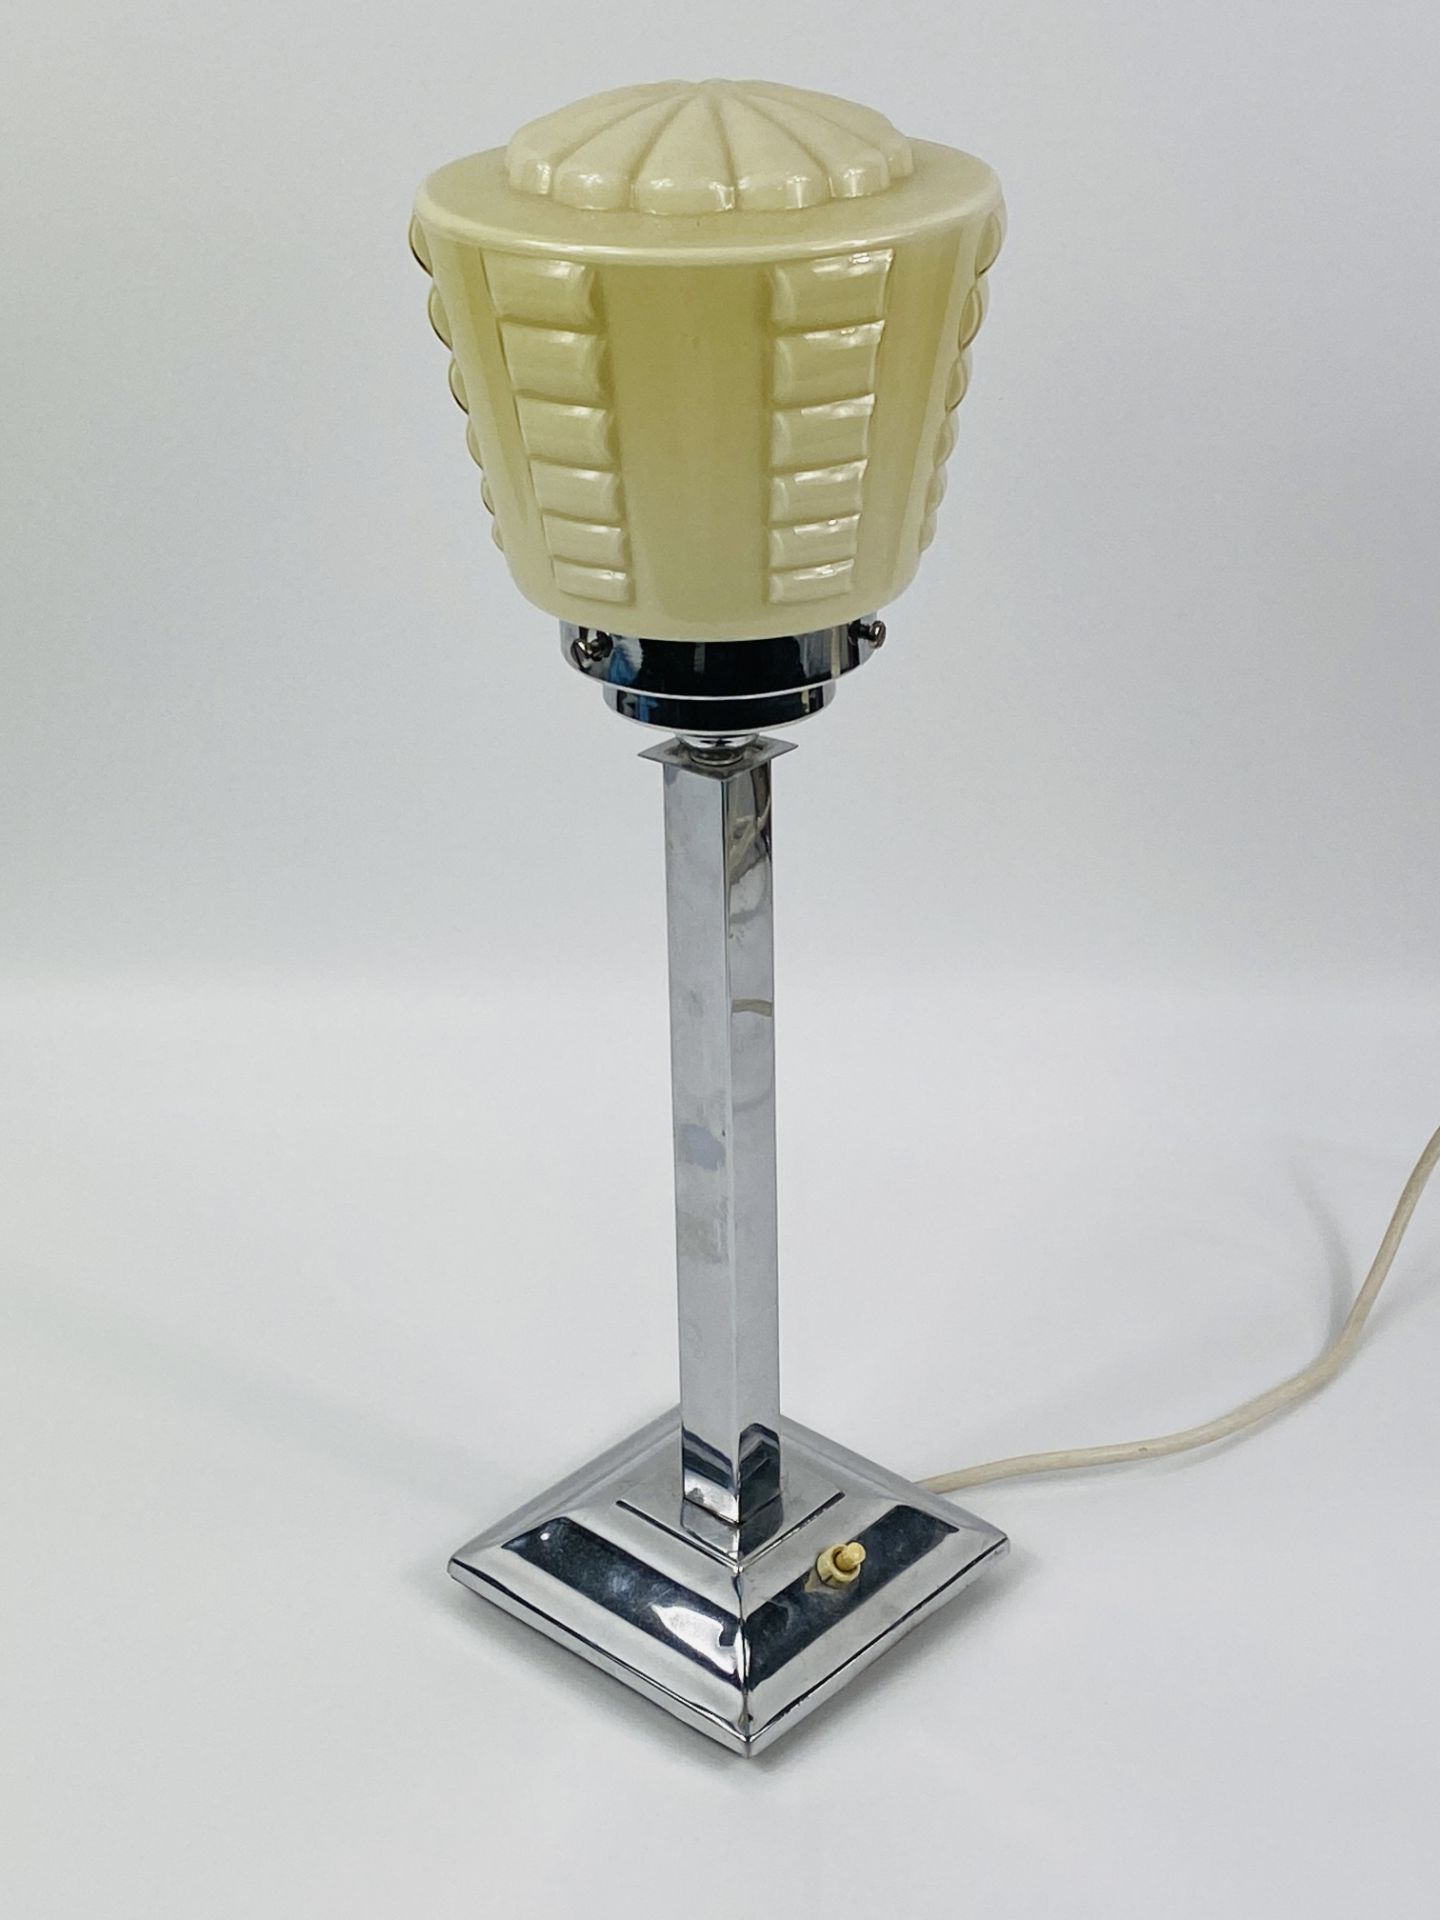 Art deco table lamp - Image 4 of 5